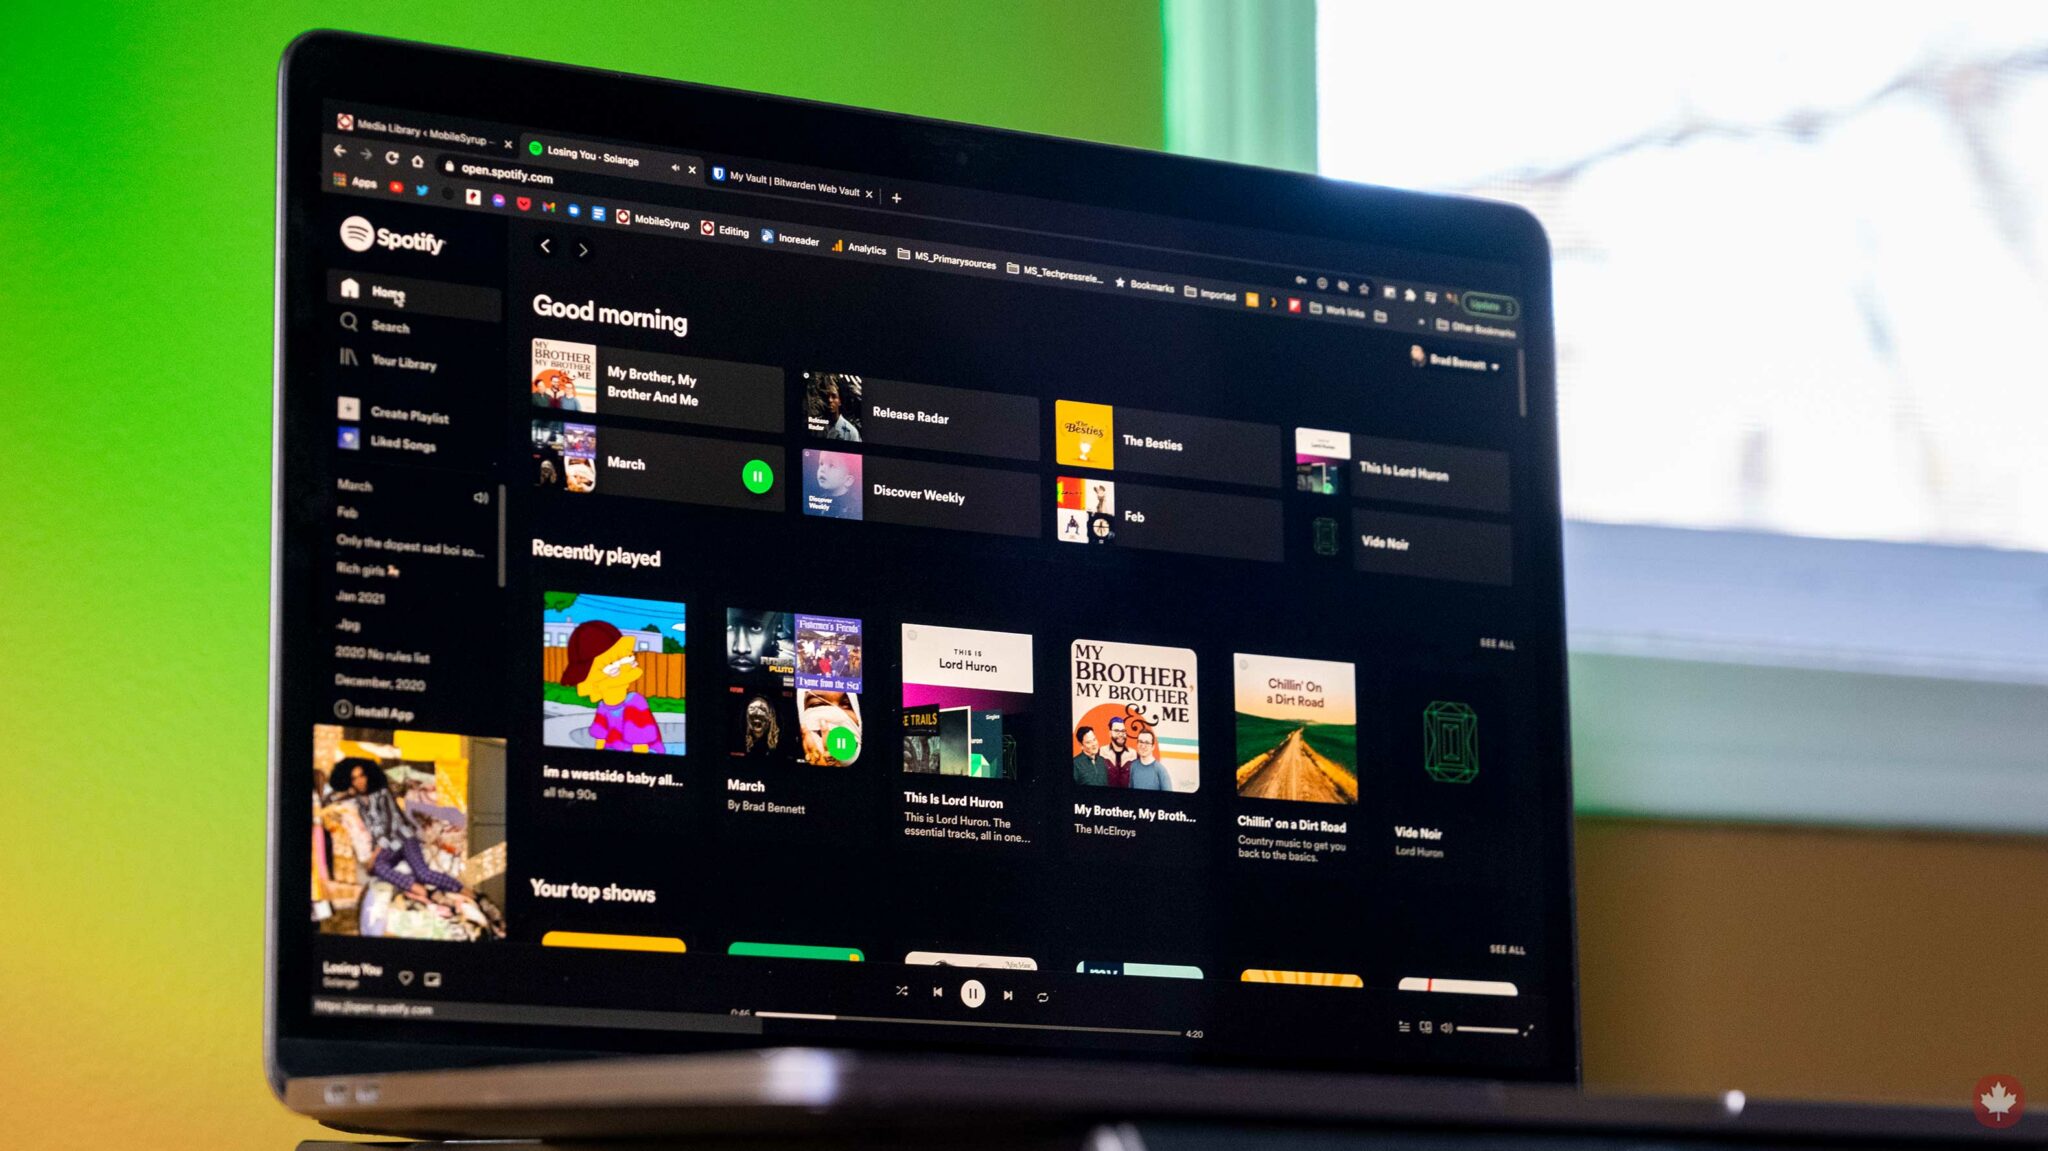 Spotify unifies desktop, web and mobile designs